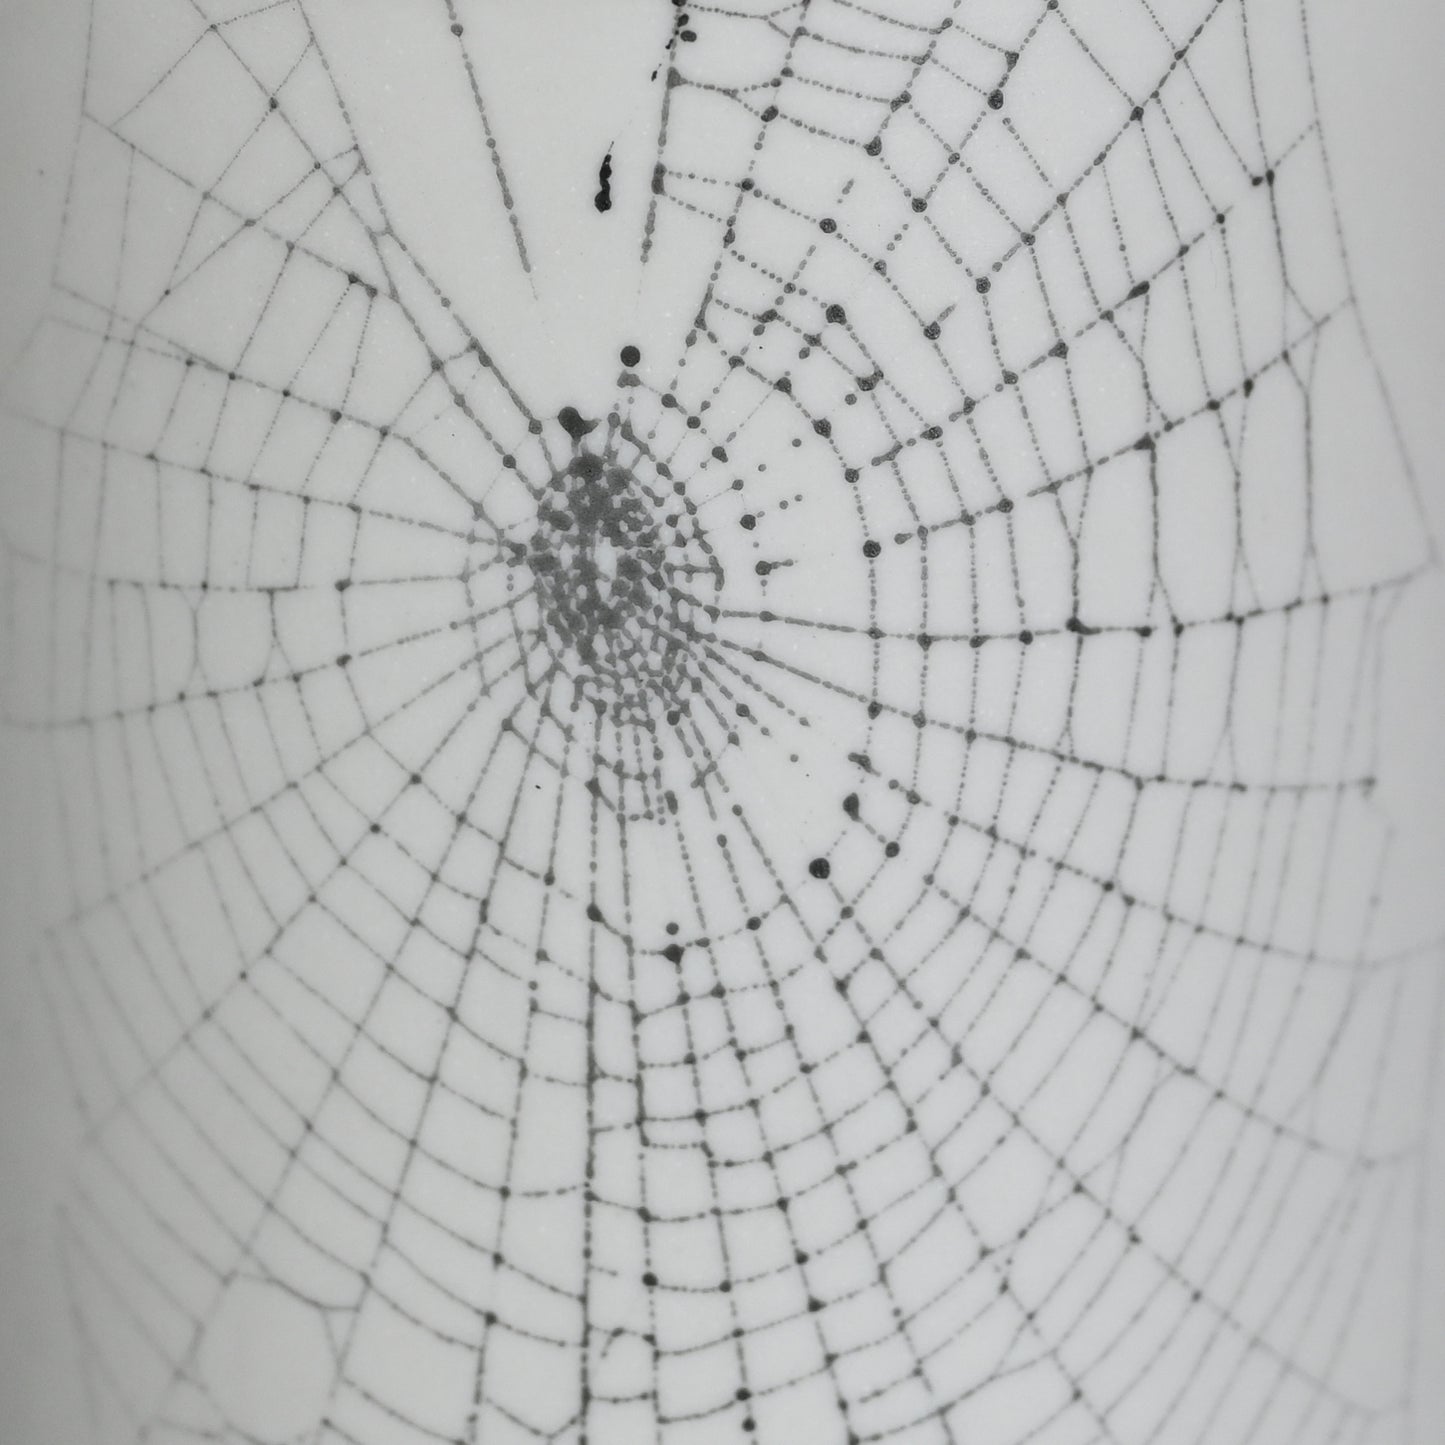 Web on Clay (175), Collected September 12, 2022